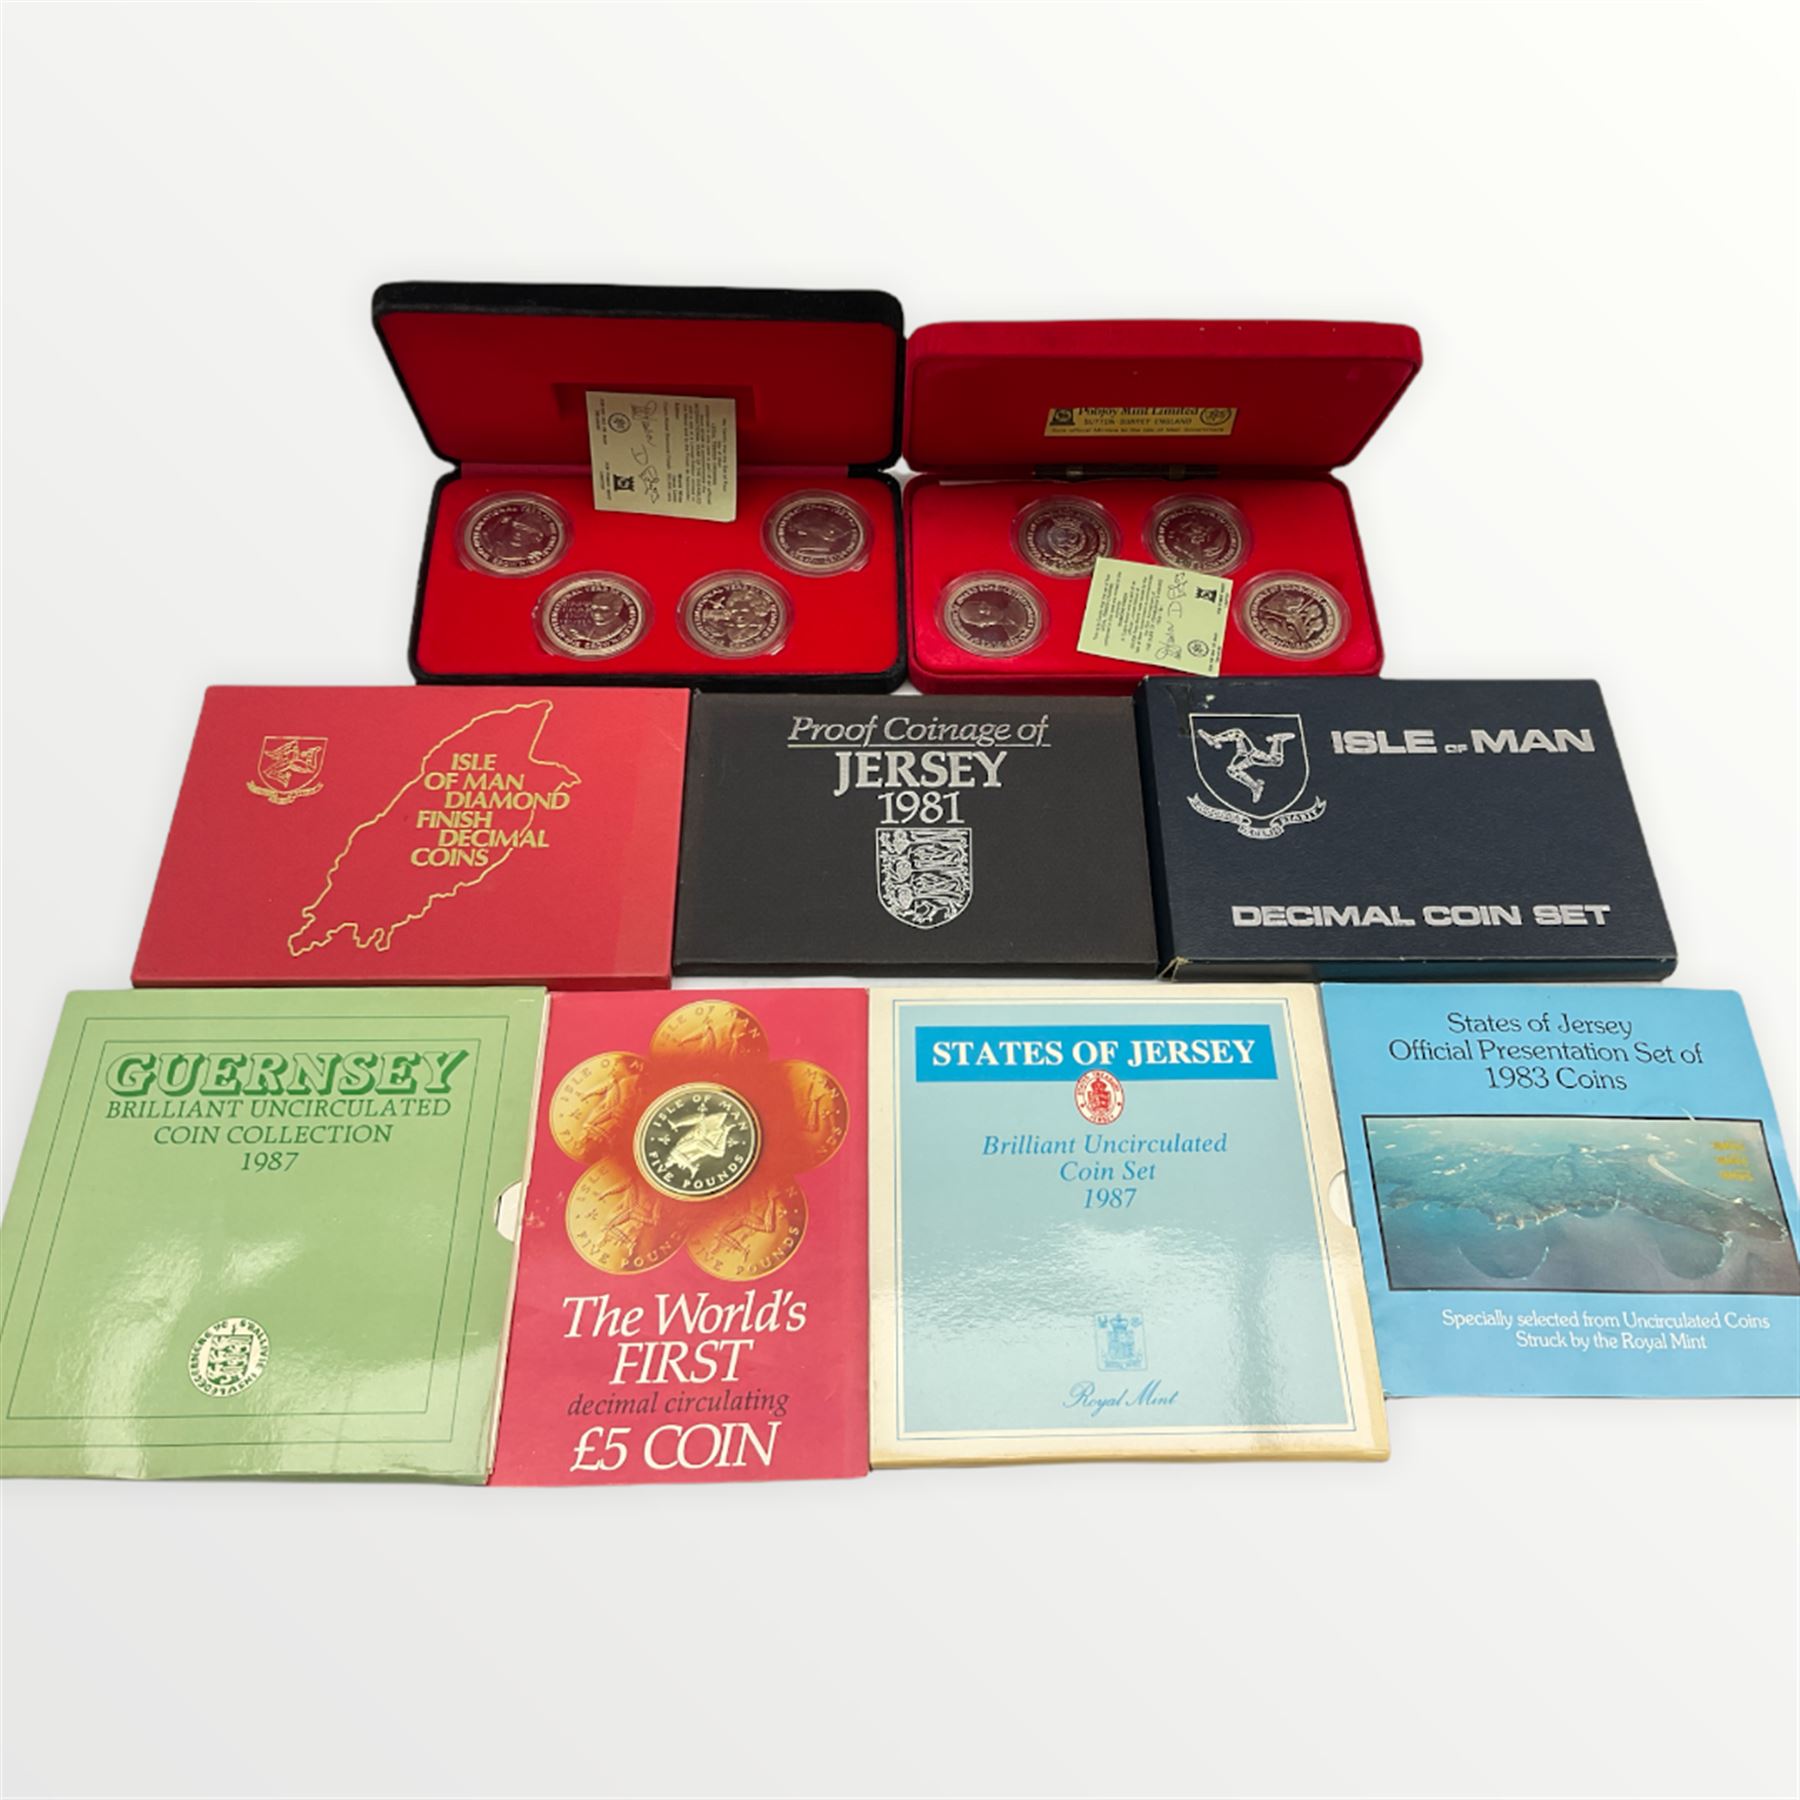 Isle of Man 1976 sterling silver coin set